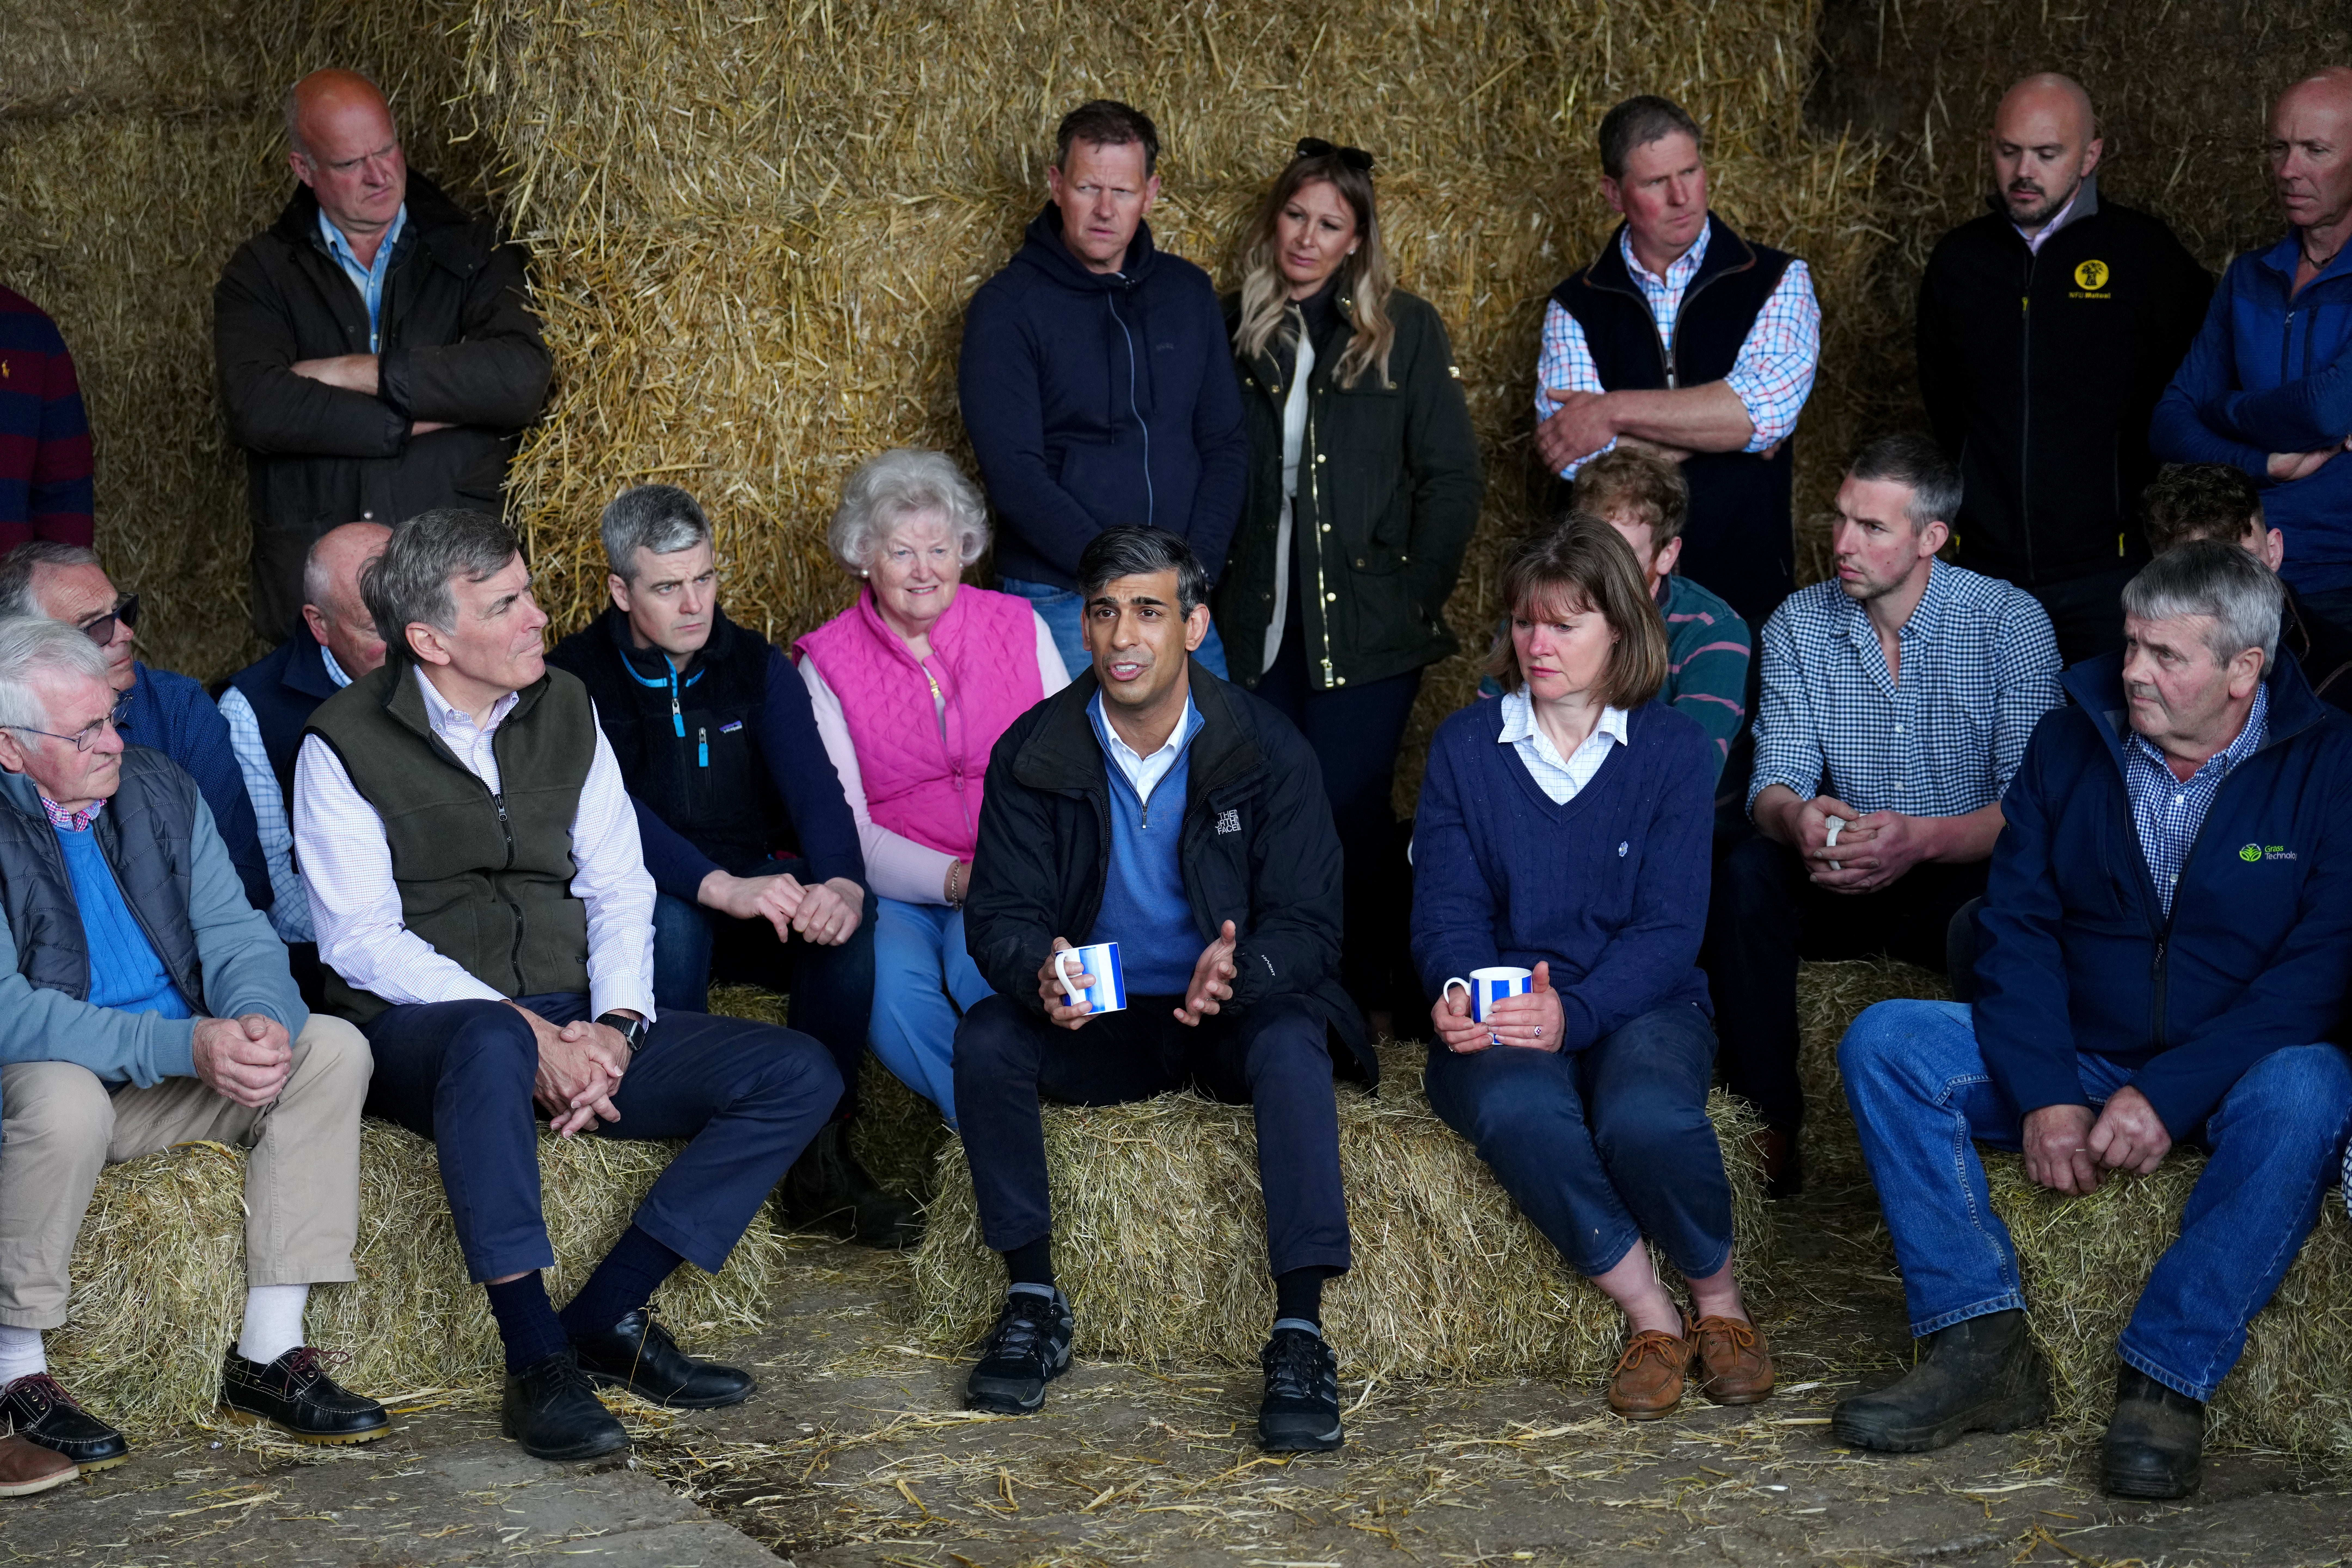 Sunak meets members of the farming community with Conservative Parliamentary Candidate for Macclesfield, David Rutley